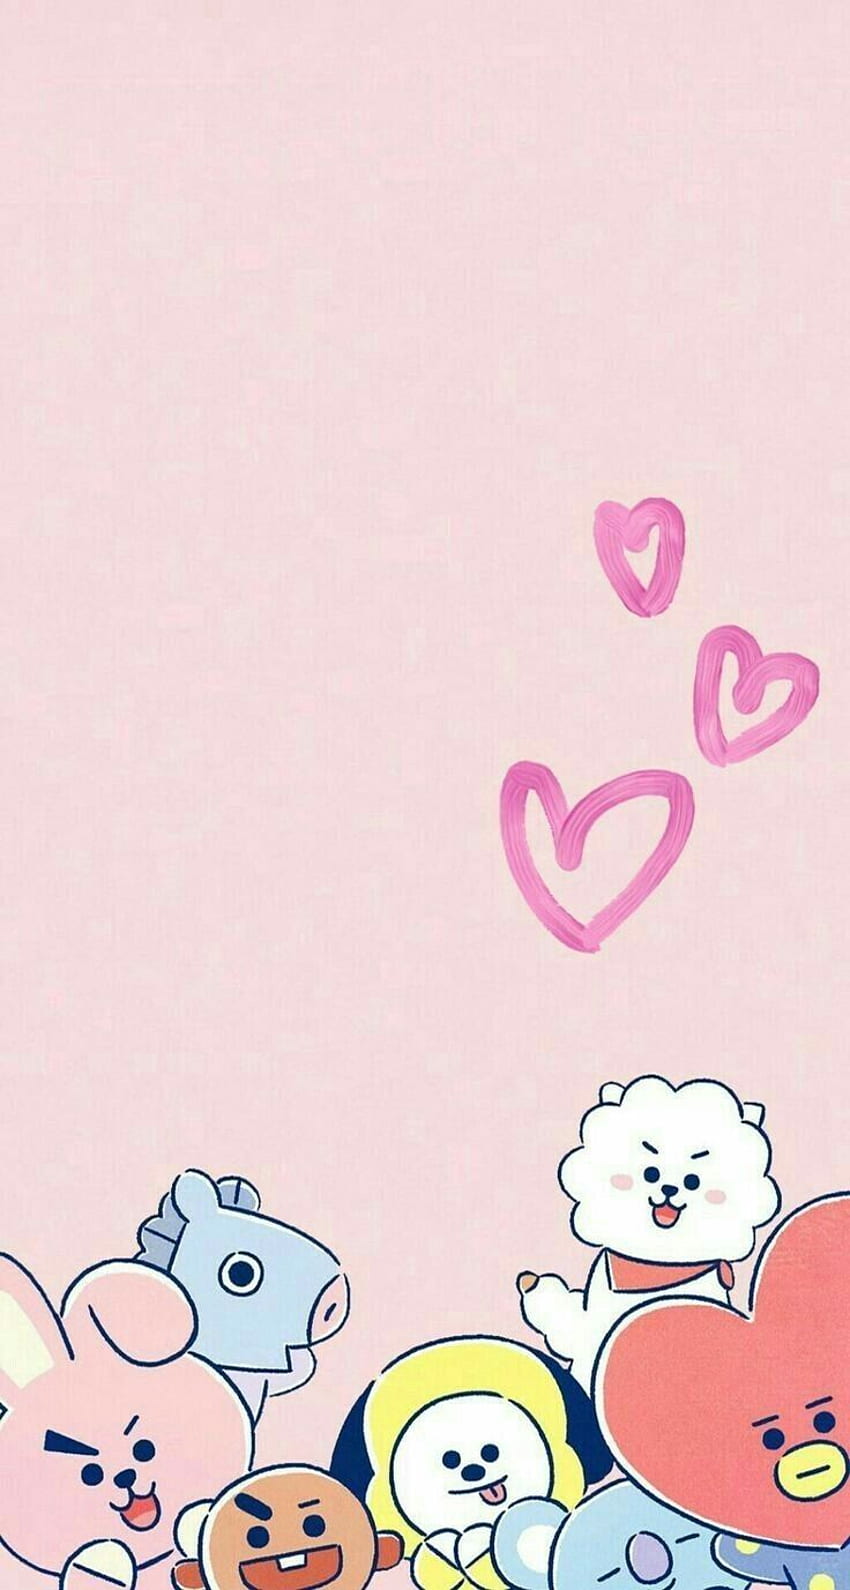 Discover more than 58 bt21 wallpaper iphone - in.cdgdbentre